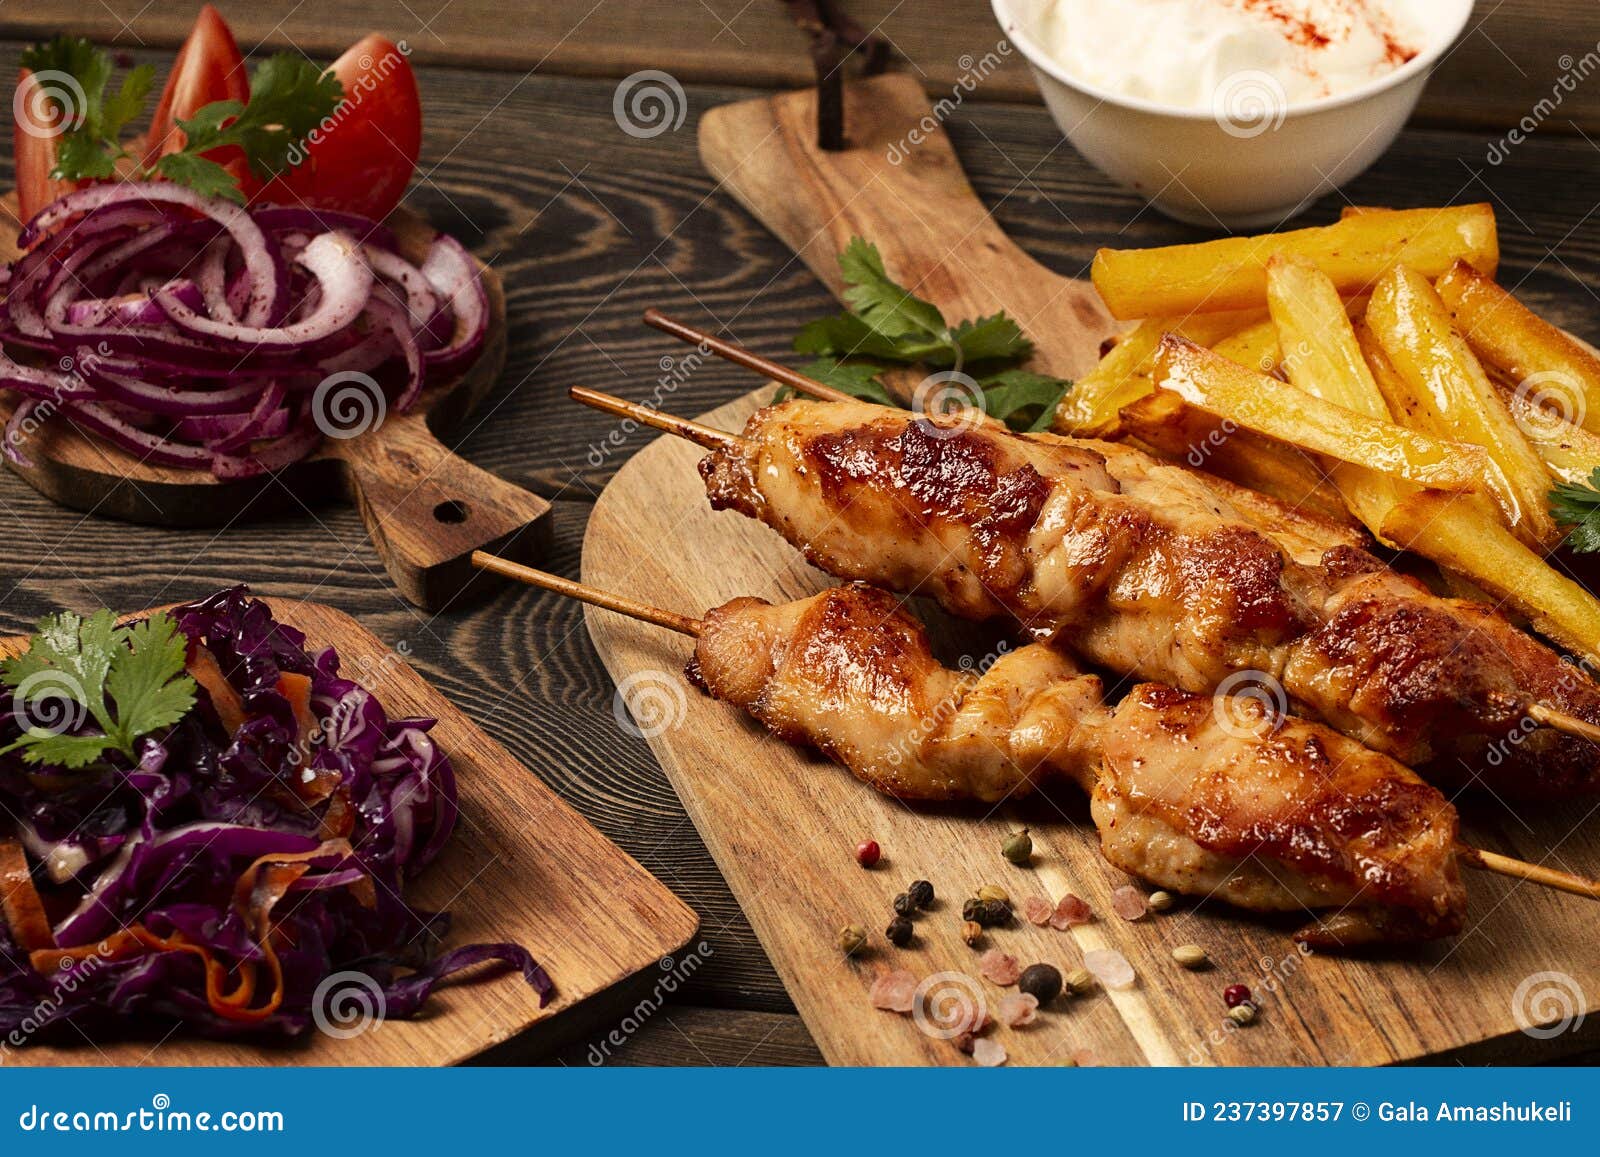 Arabic Traditional Cuisine, Shish Tawk with Potatoes and Red Cabbage ...